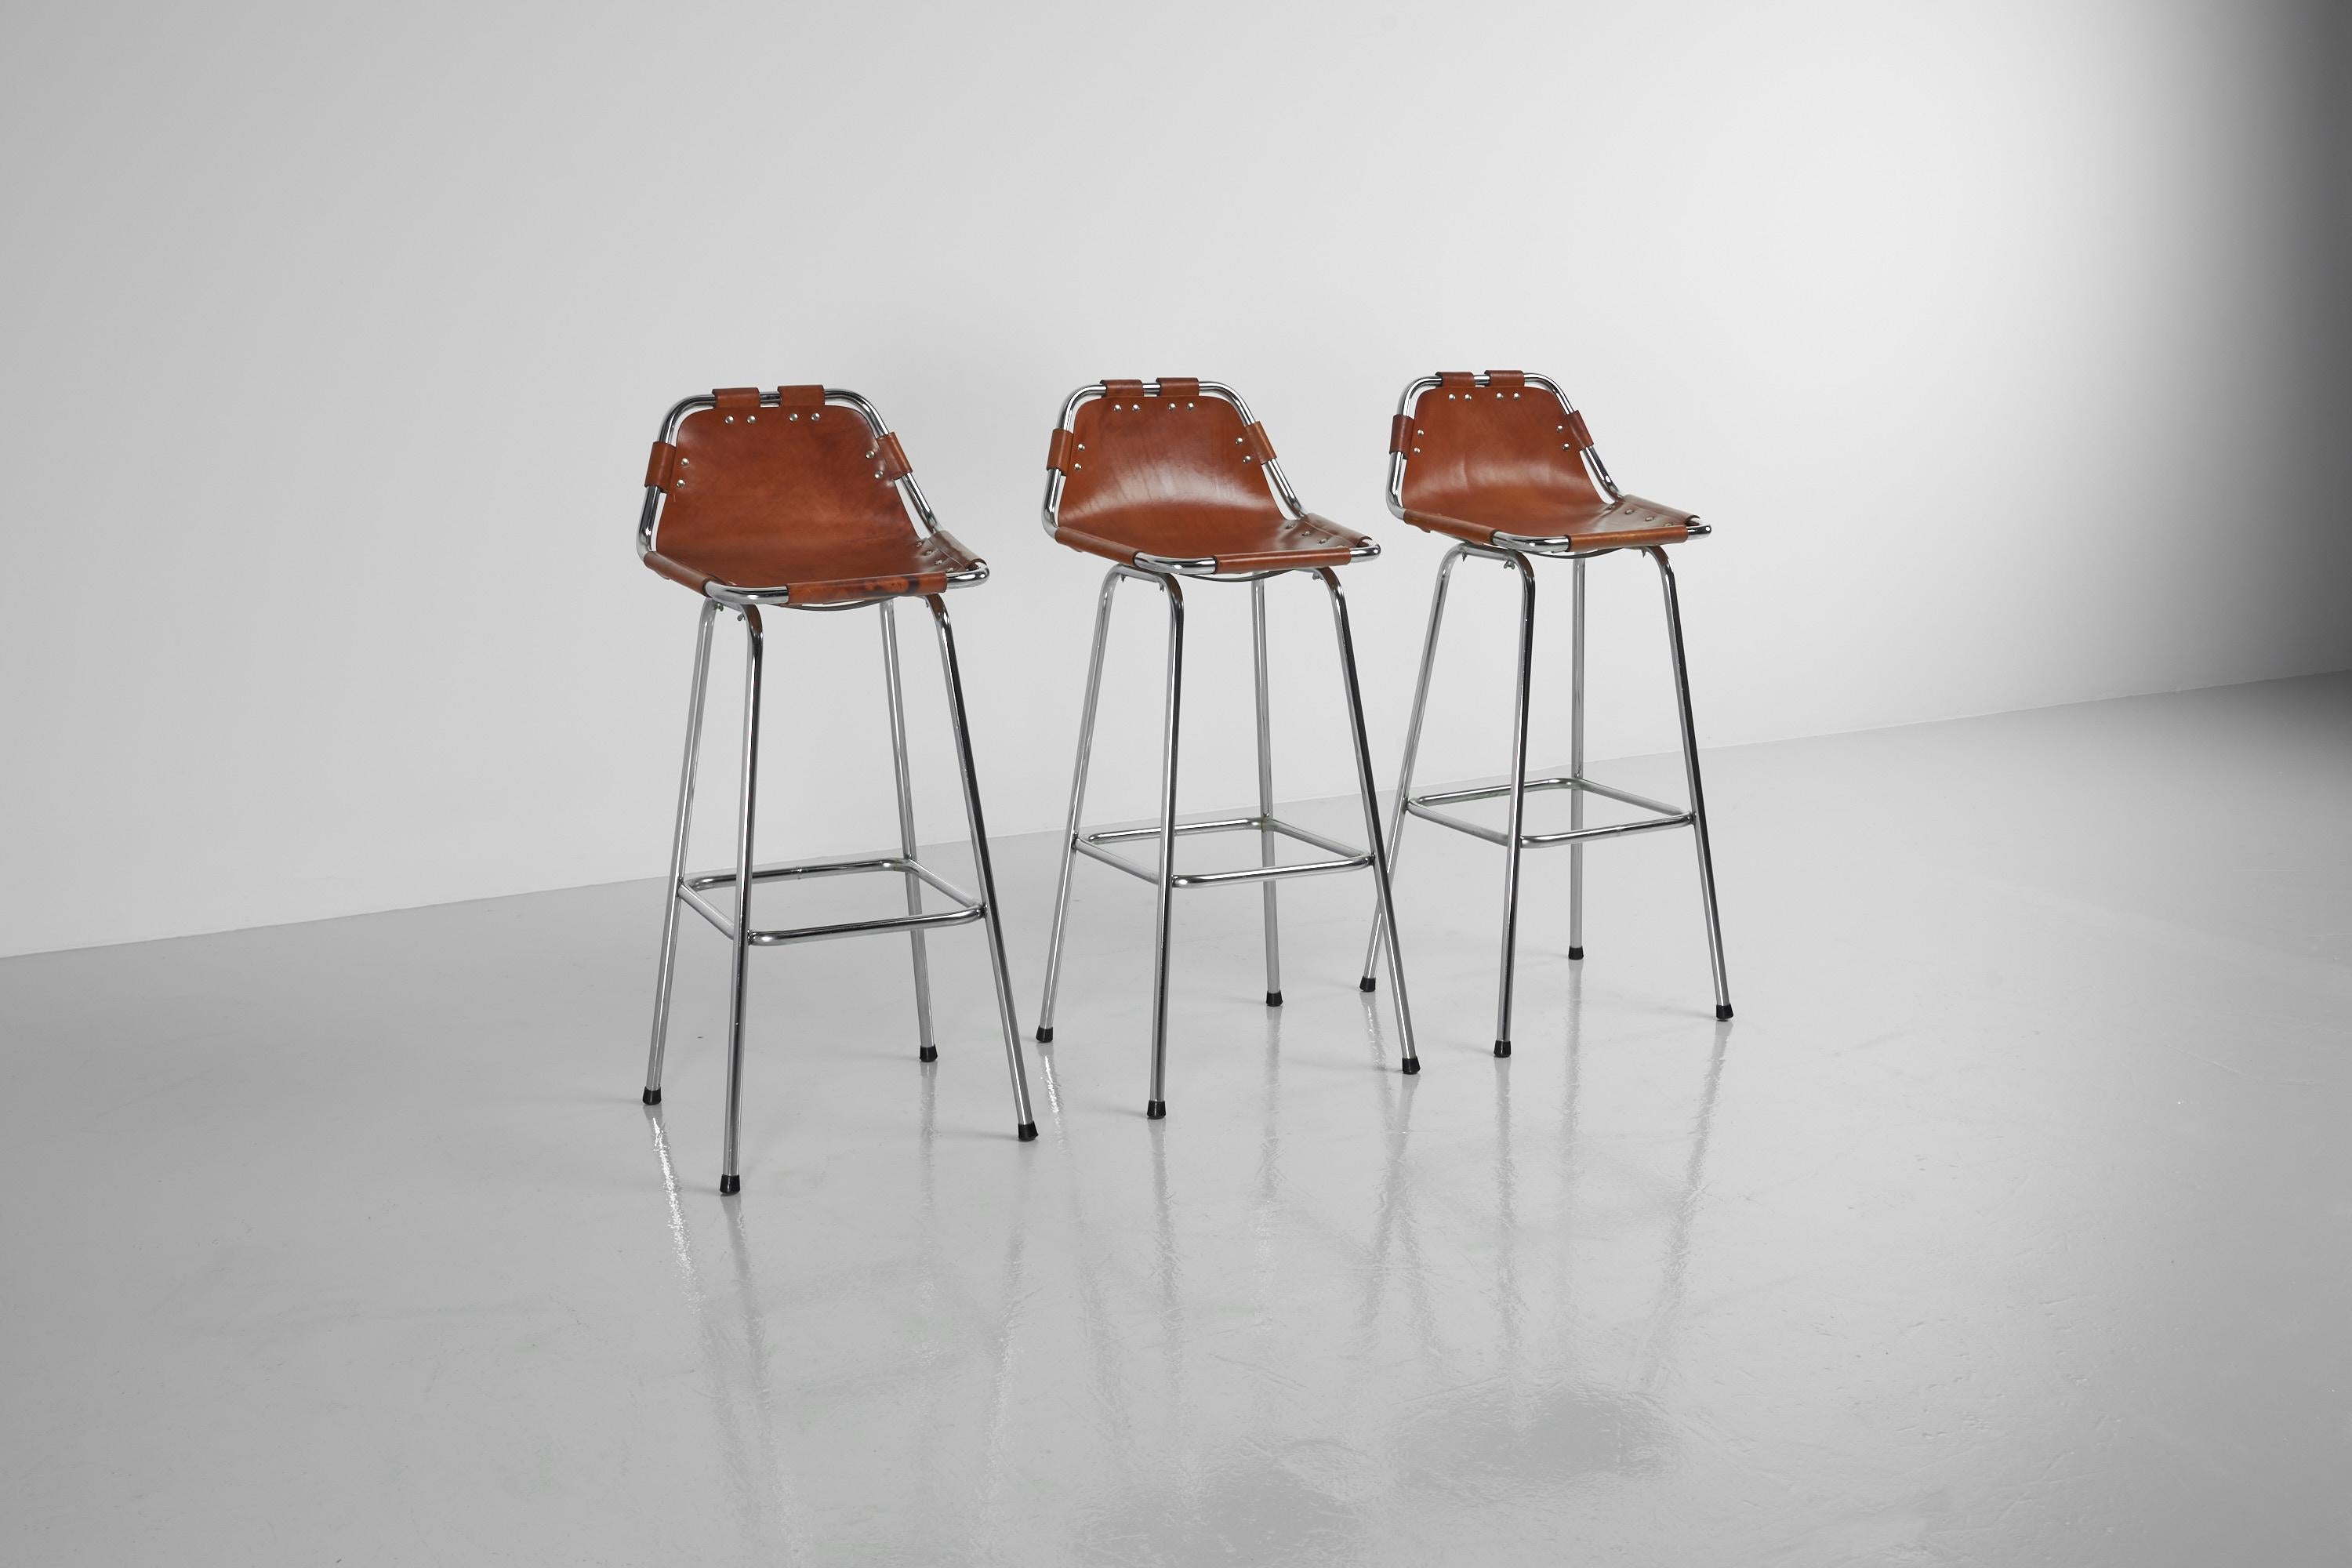 Mid-20th Century Bar Stools in Leather and Chrome Set of 3, France, 1960